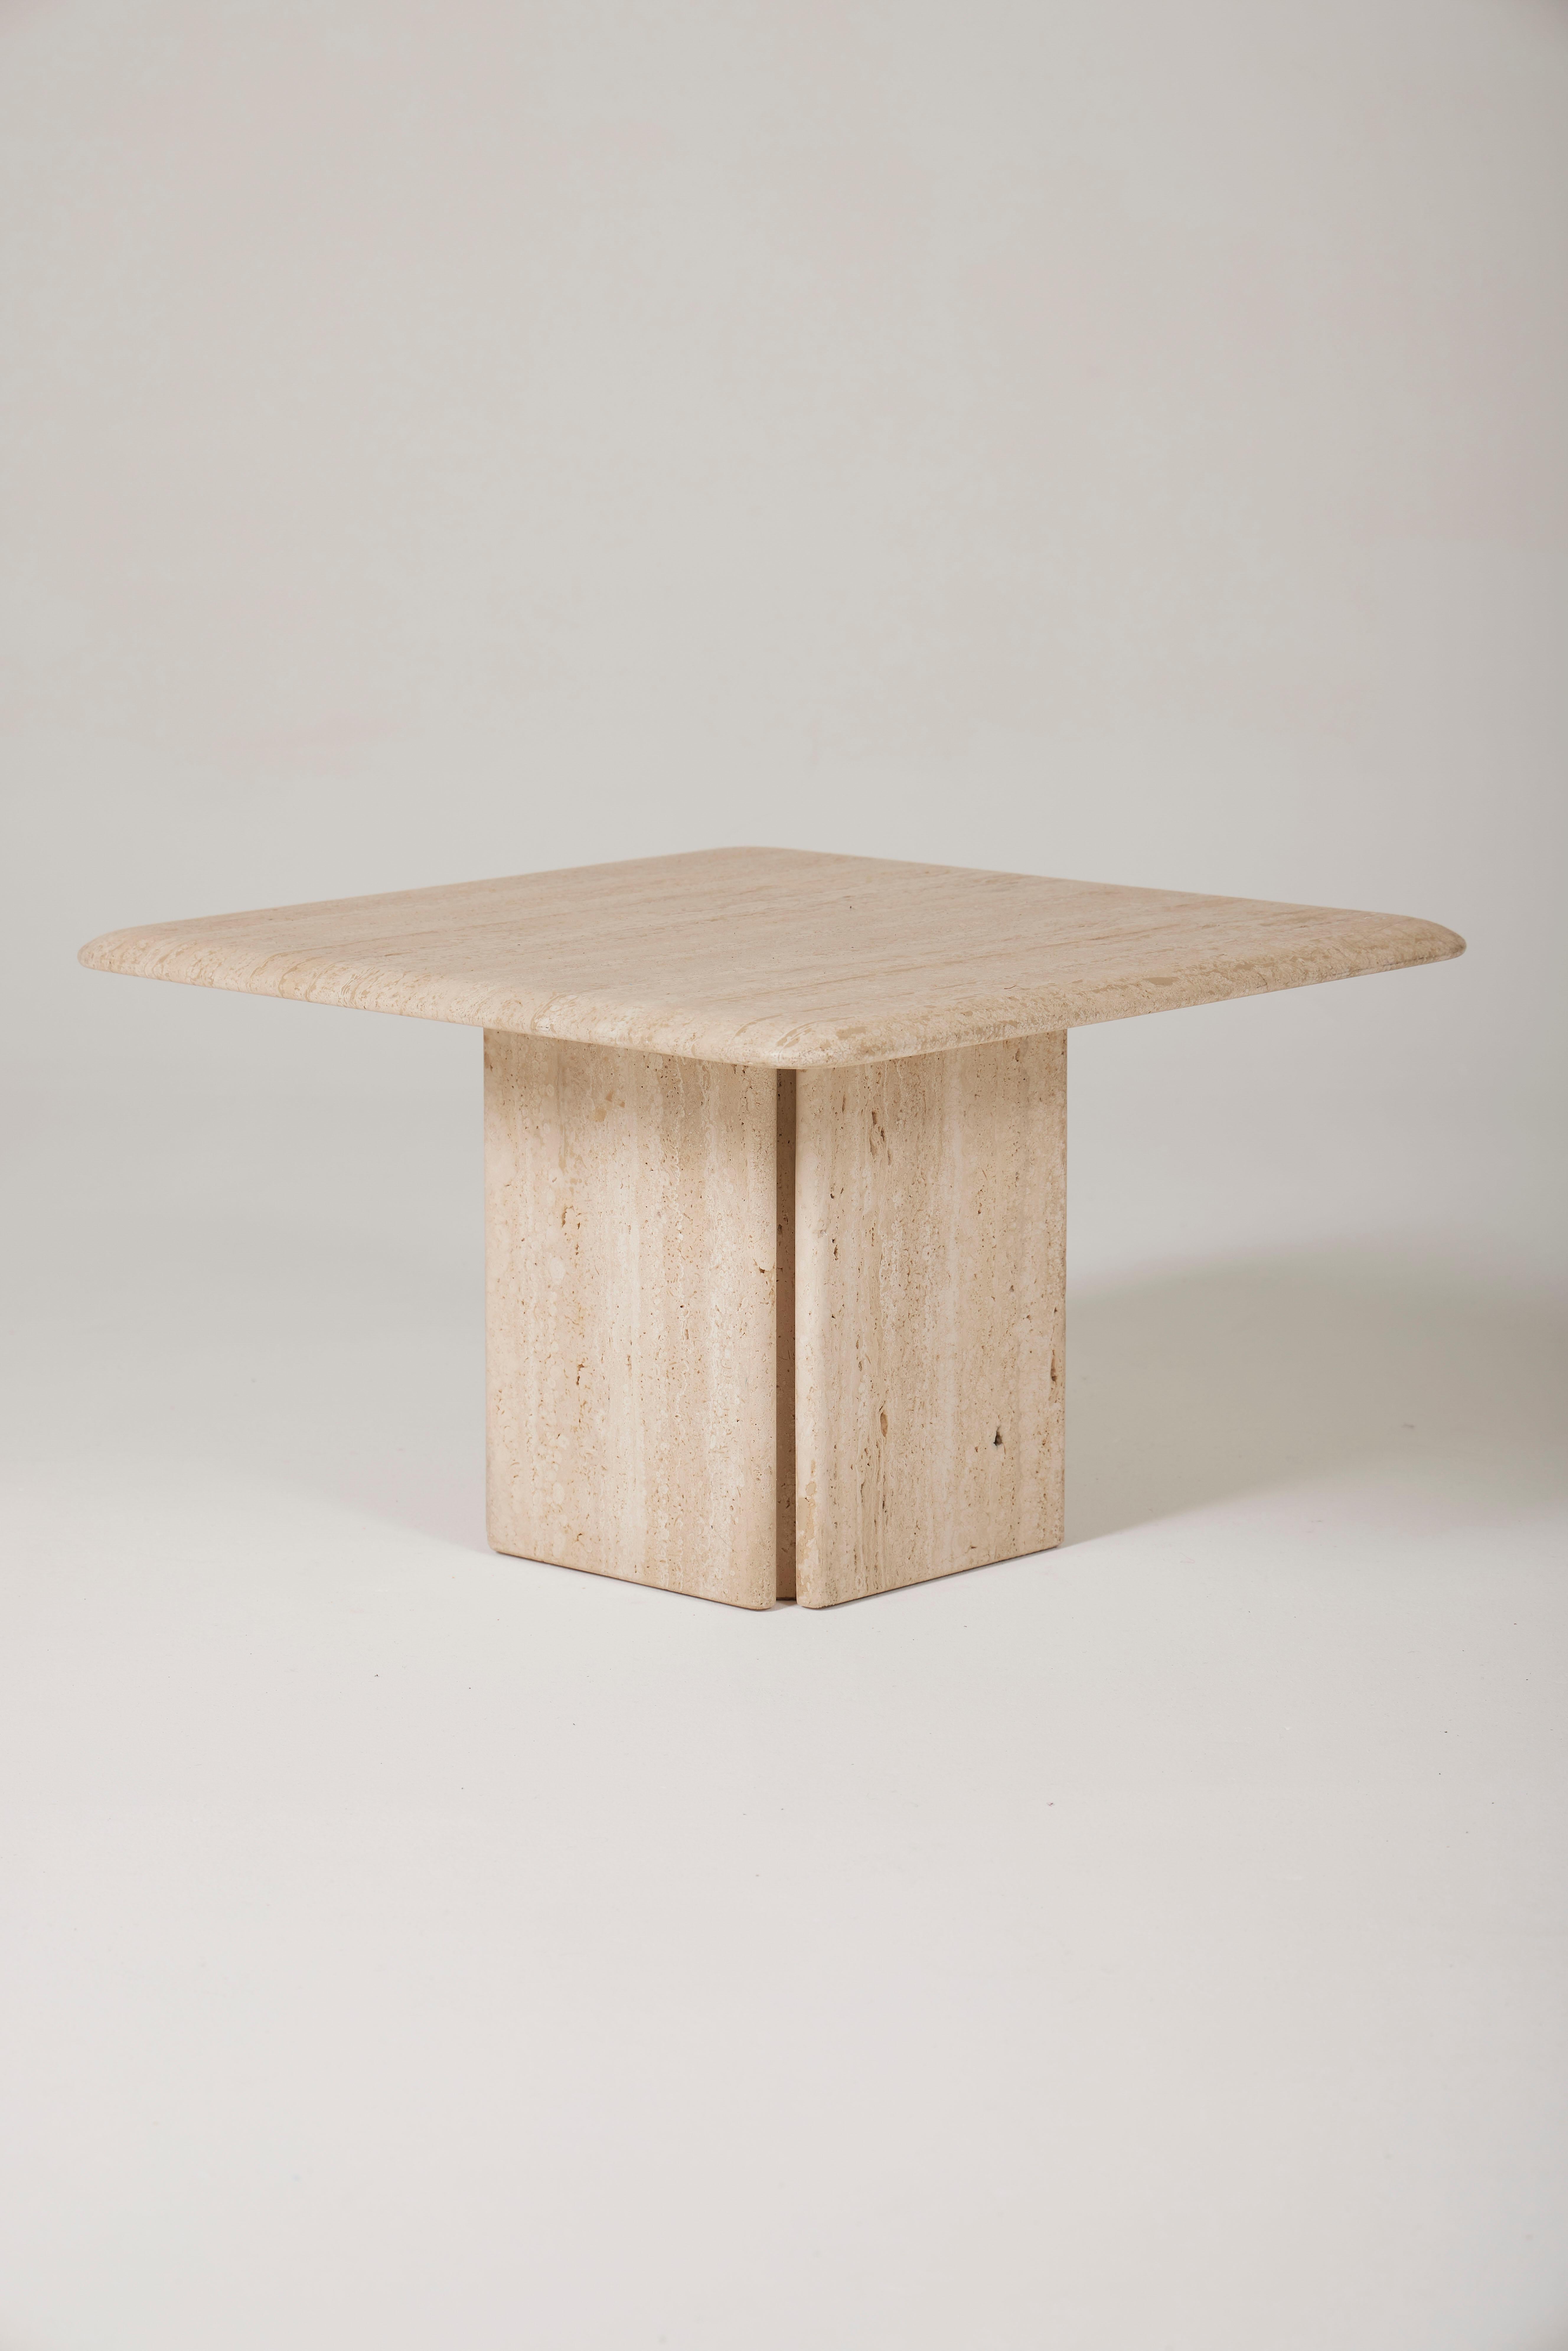 Square travertine coffee table, produced by the Ligne Roset house in the 1970s. Founded in 1860, Ligne Roset has collaborated with various designers, including Pascal Mourgue, Pierre Paulin, and Michel Ducaroy. In very good overall condition.
LP2033